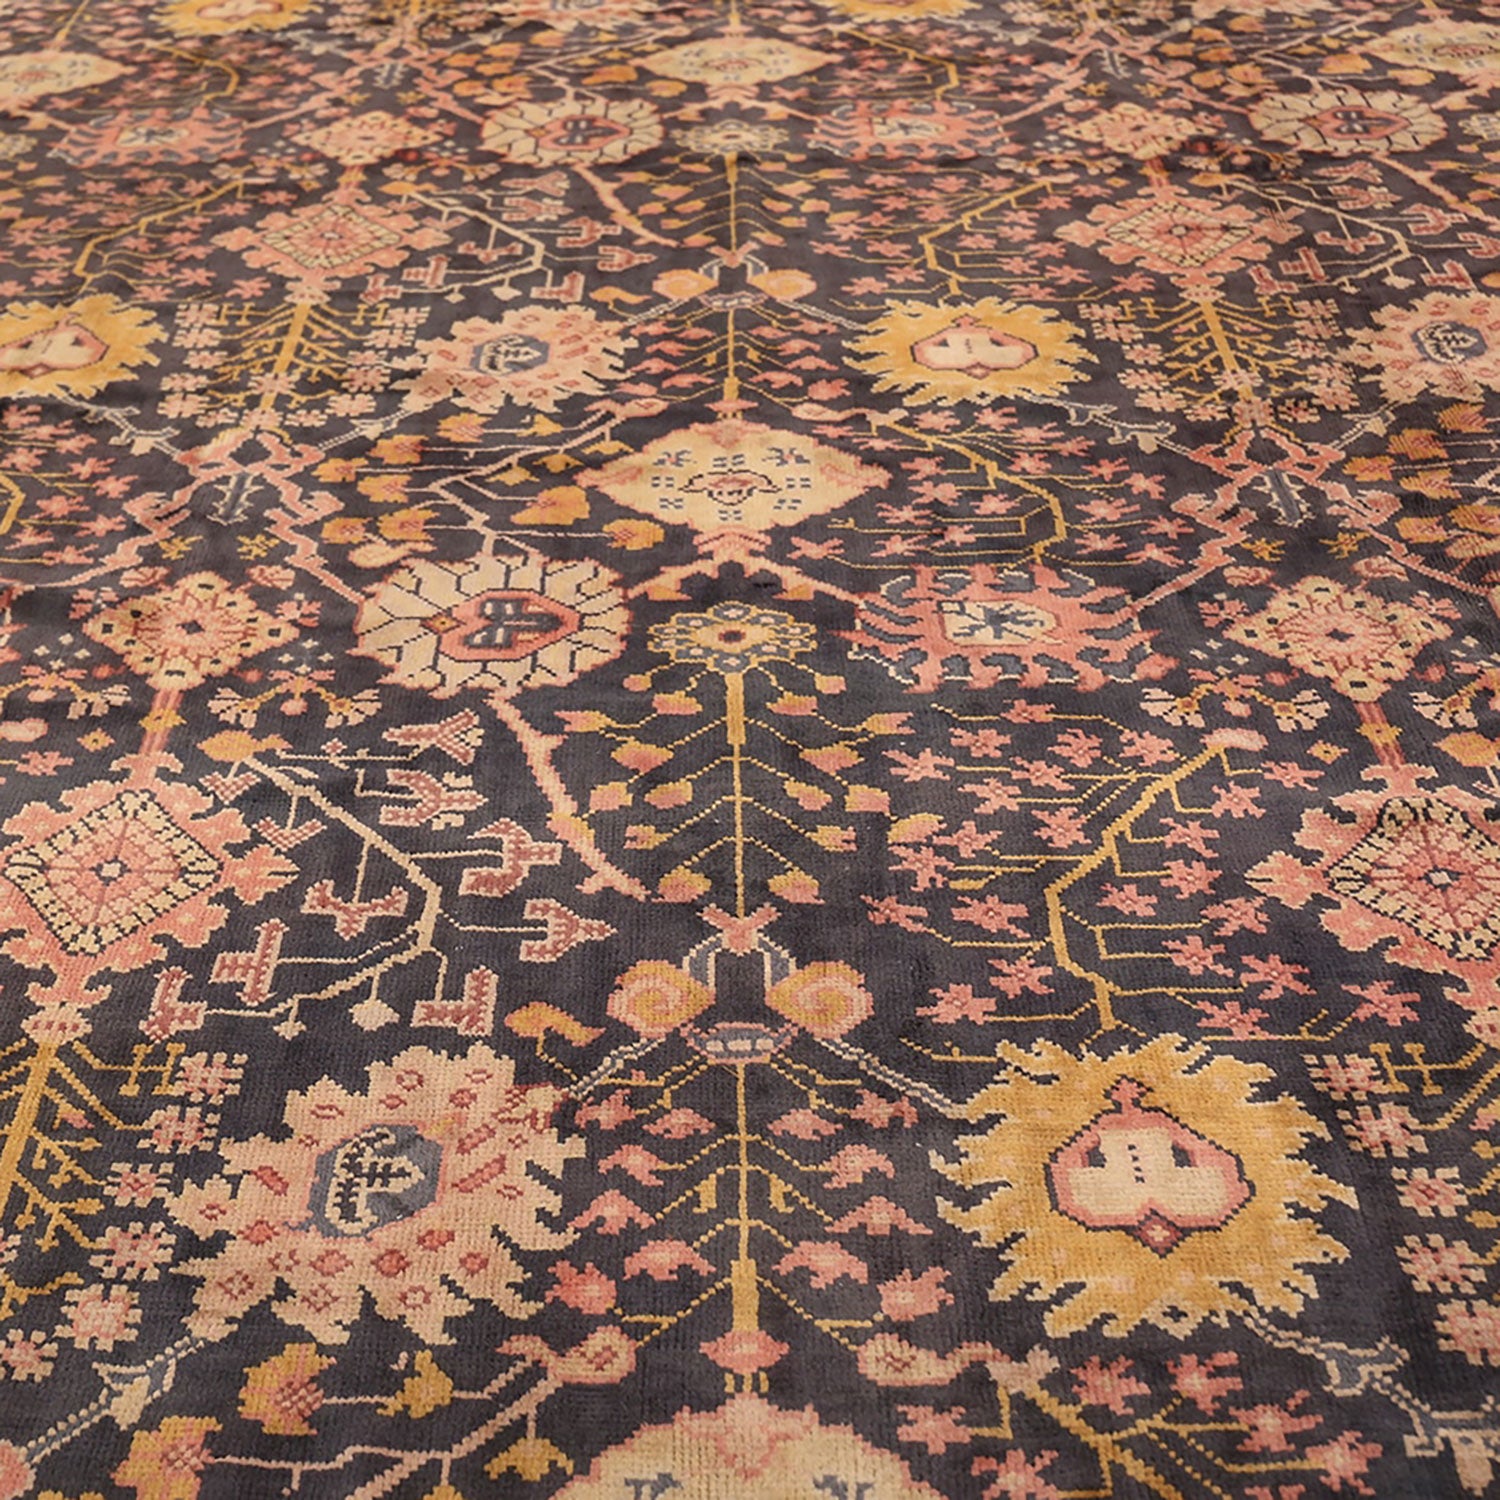 Detail section of an ornate Persian rug with intricate patterns.